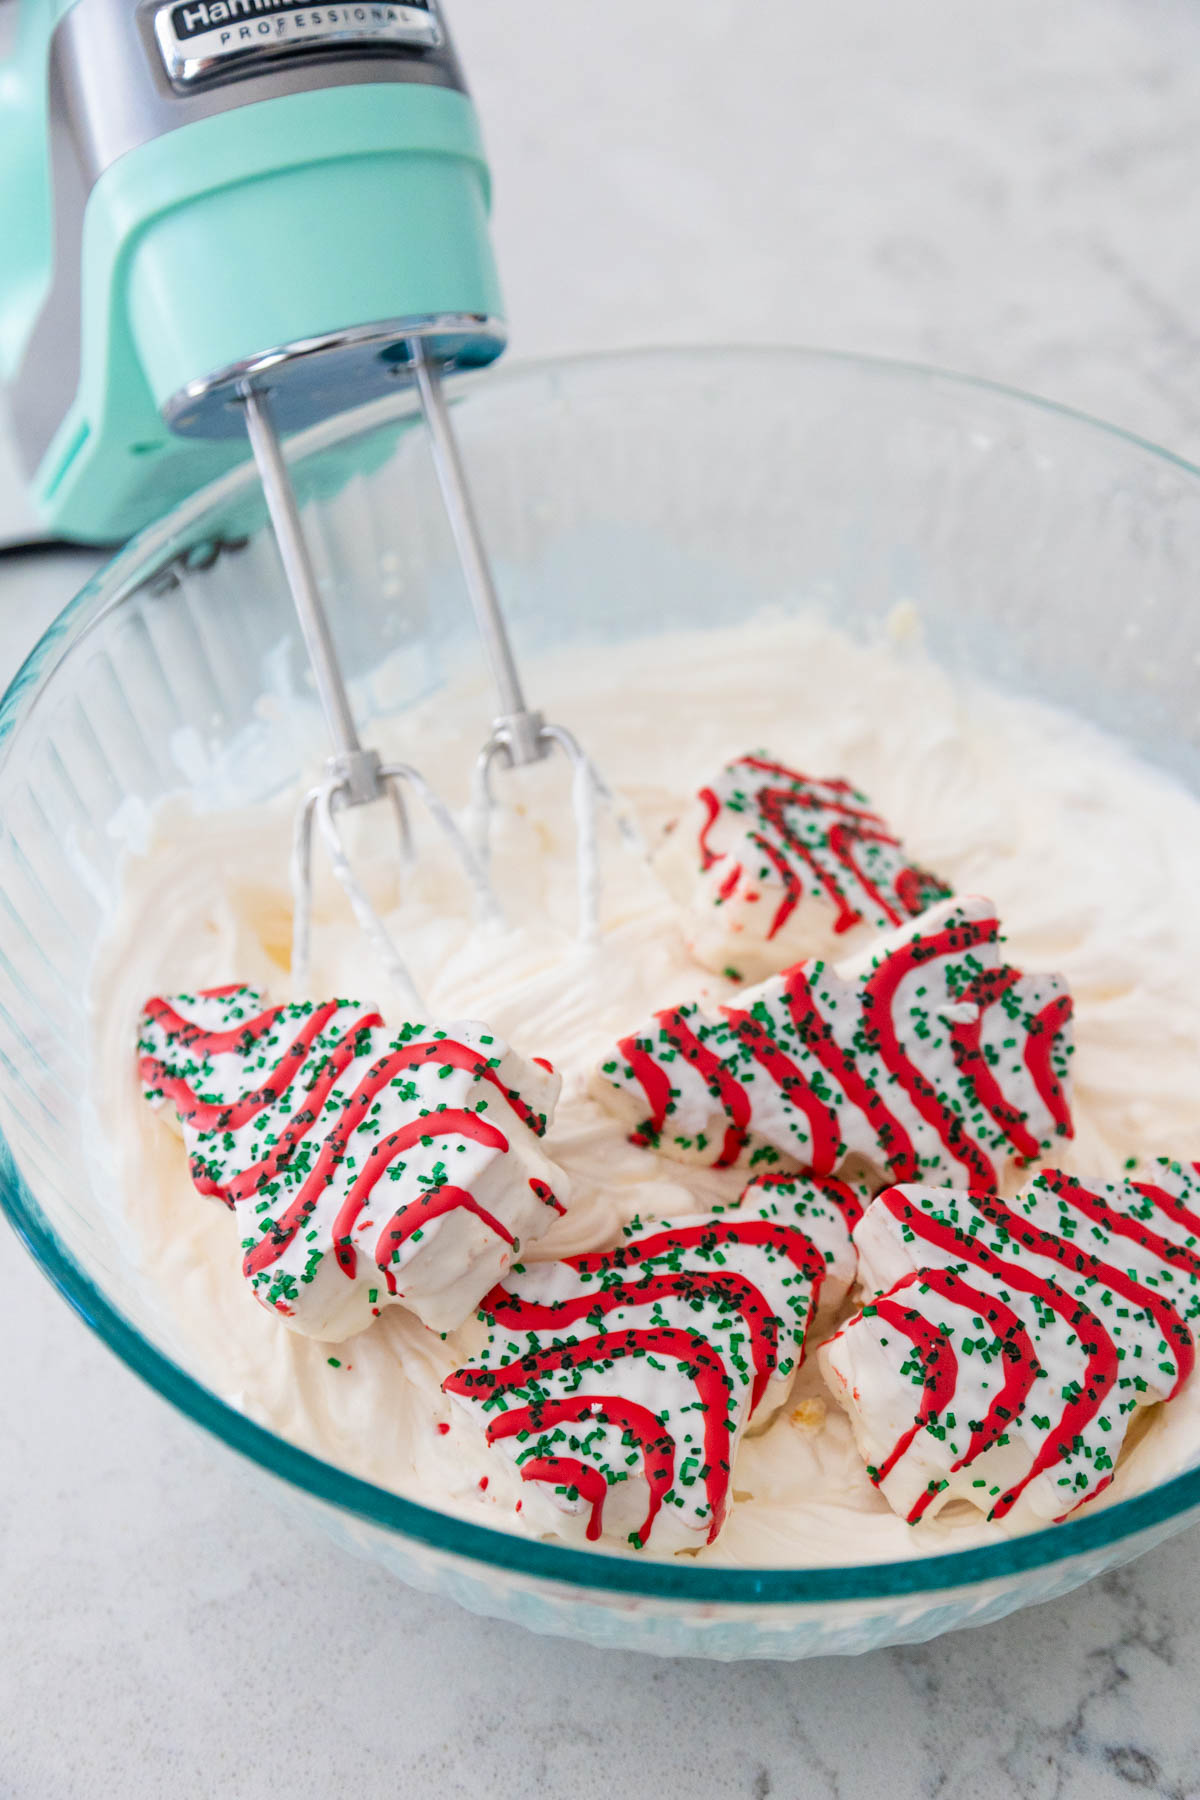 The Little Debbie Christmas Tree cakes are in the mixing bowl about to be blended in.